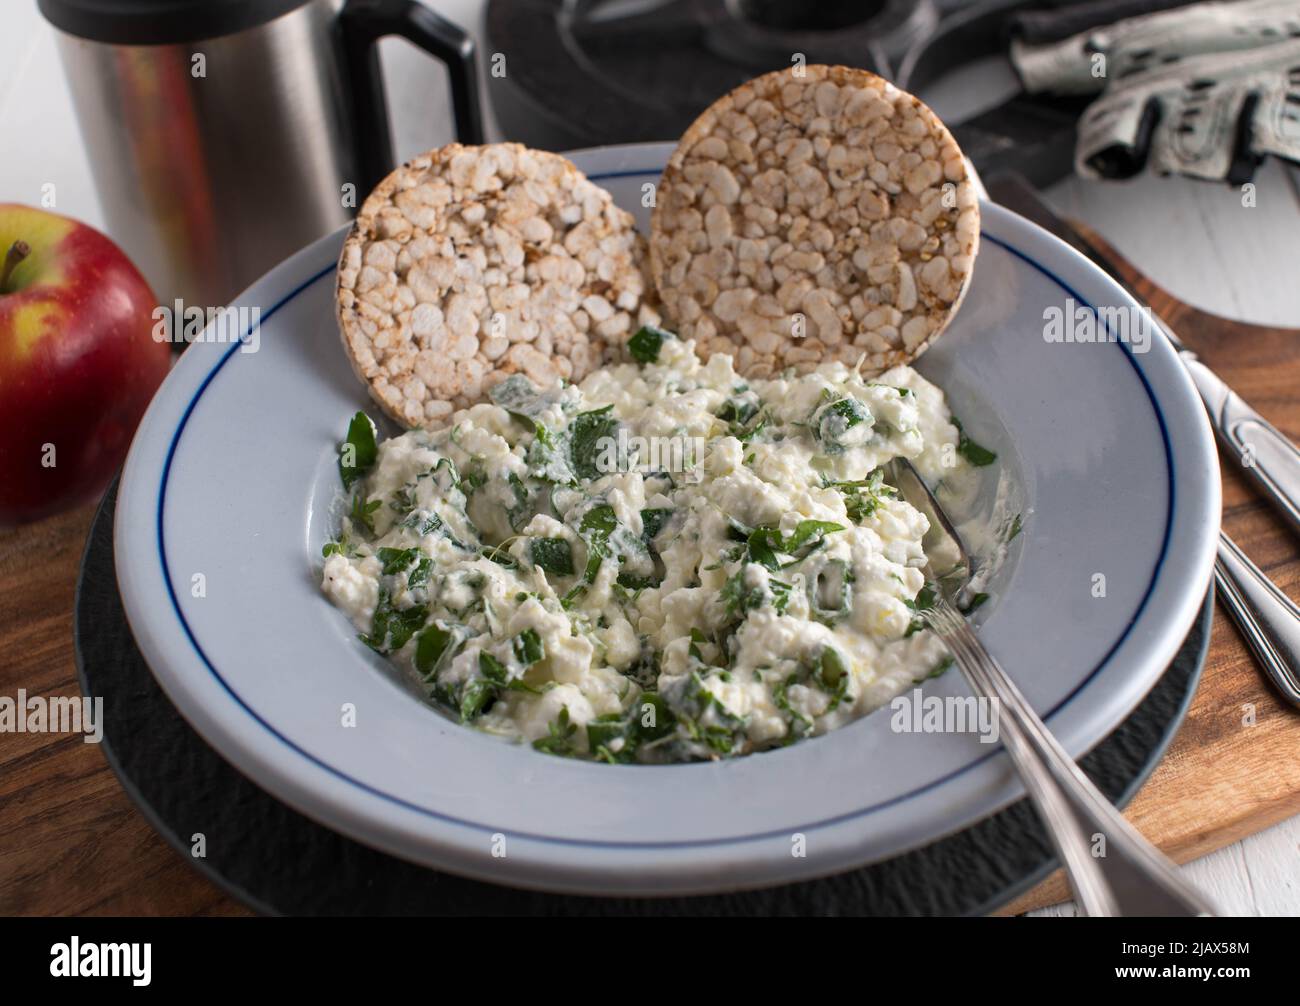 Workout meal with cottage cheese, herbs, olive oil. Served with brown rice cracker on a plate Stock Photo